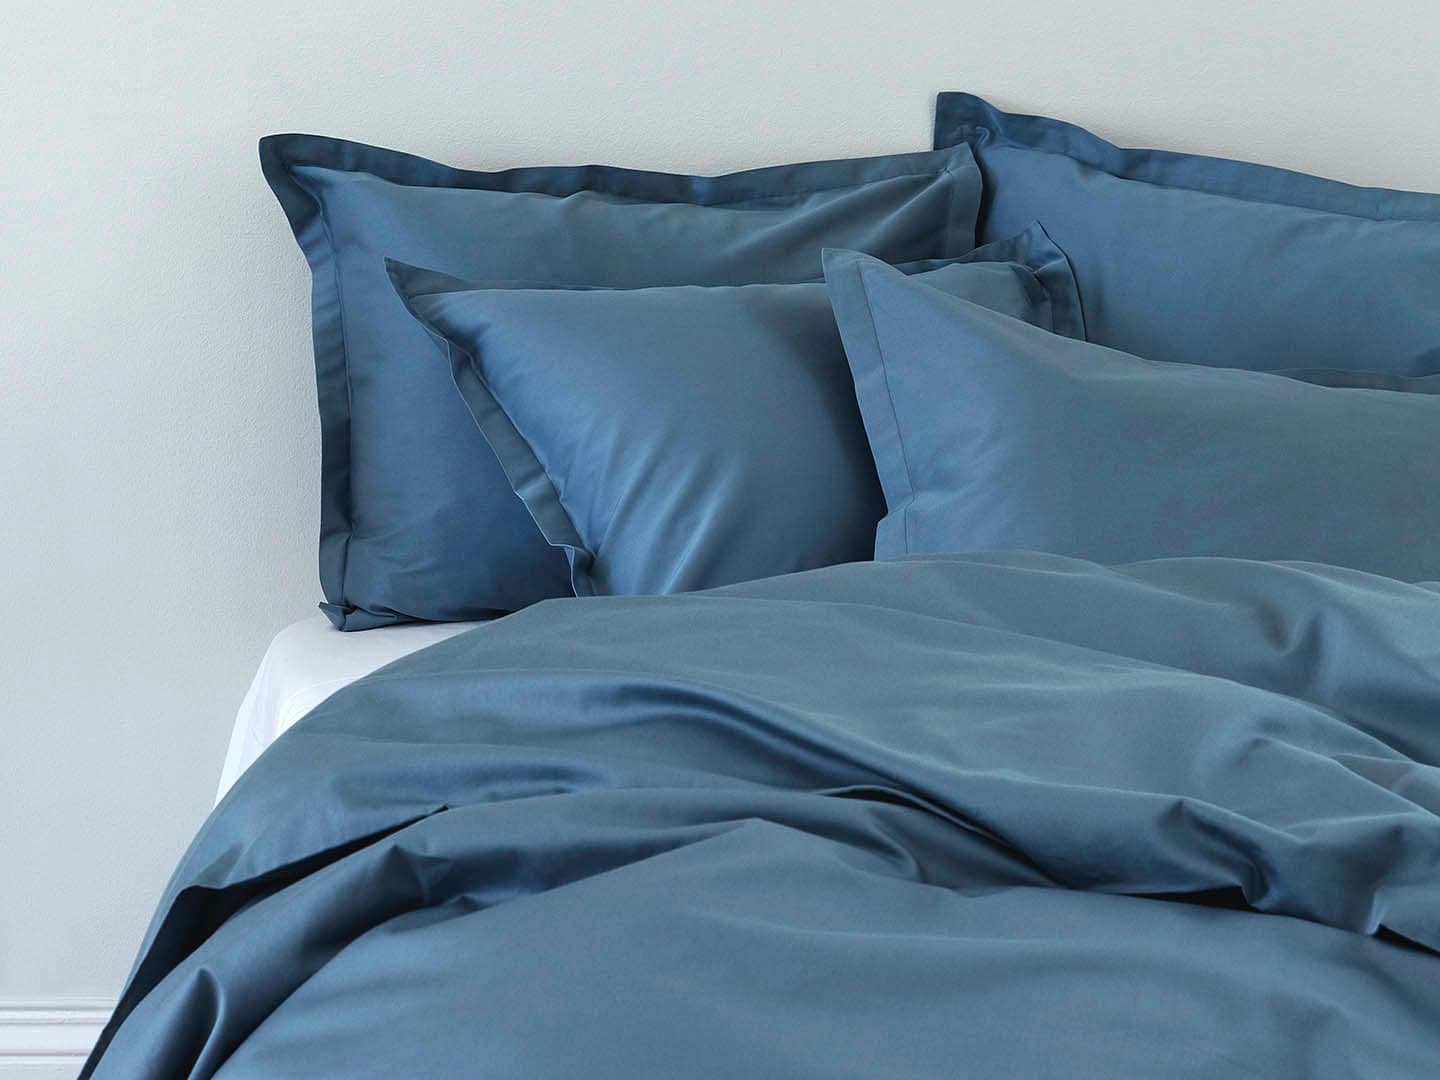 Desirable duvet cover set in several colors and designs